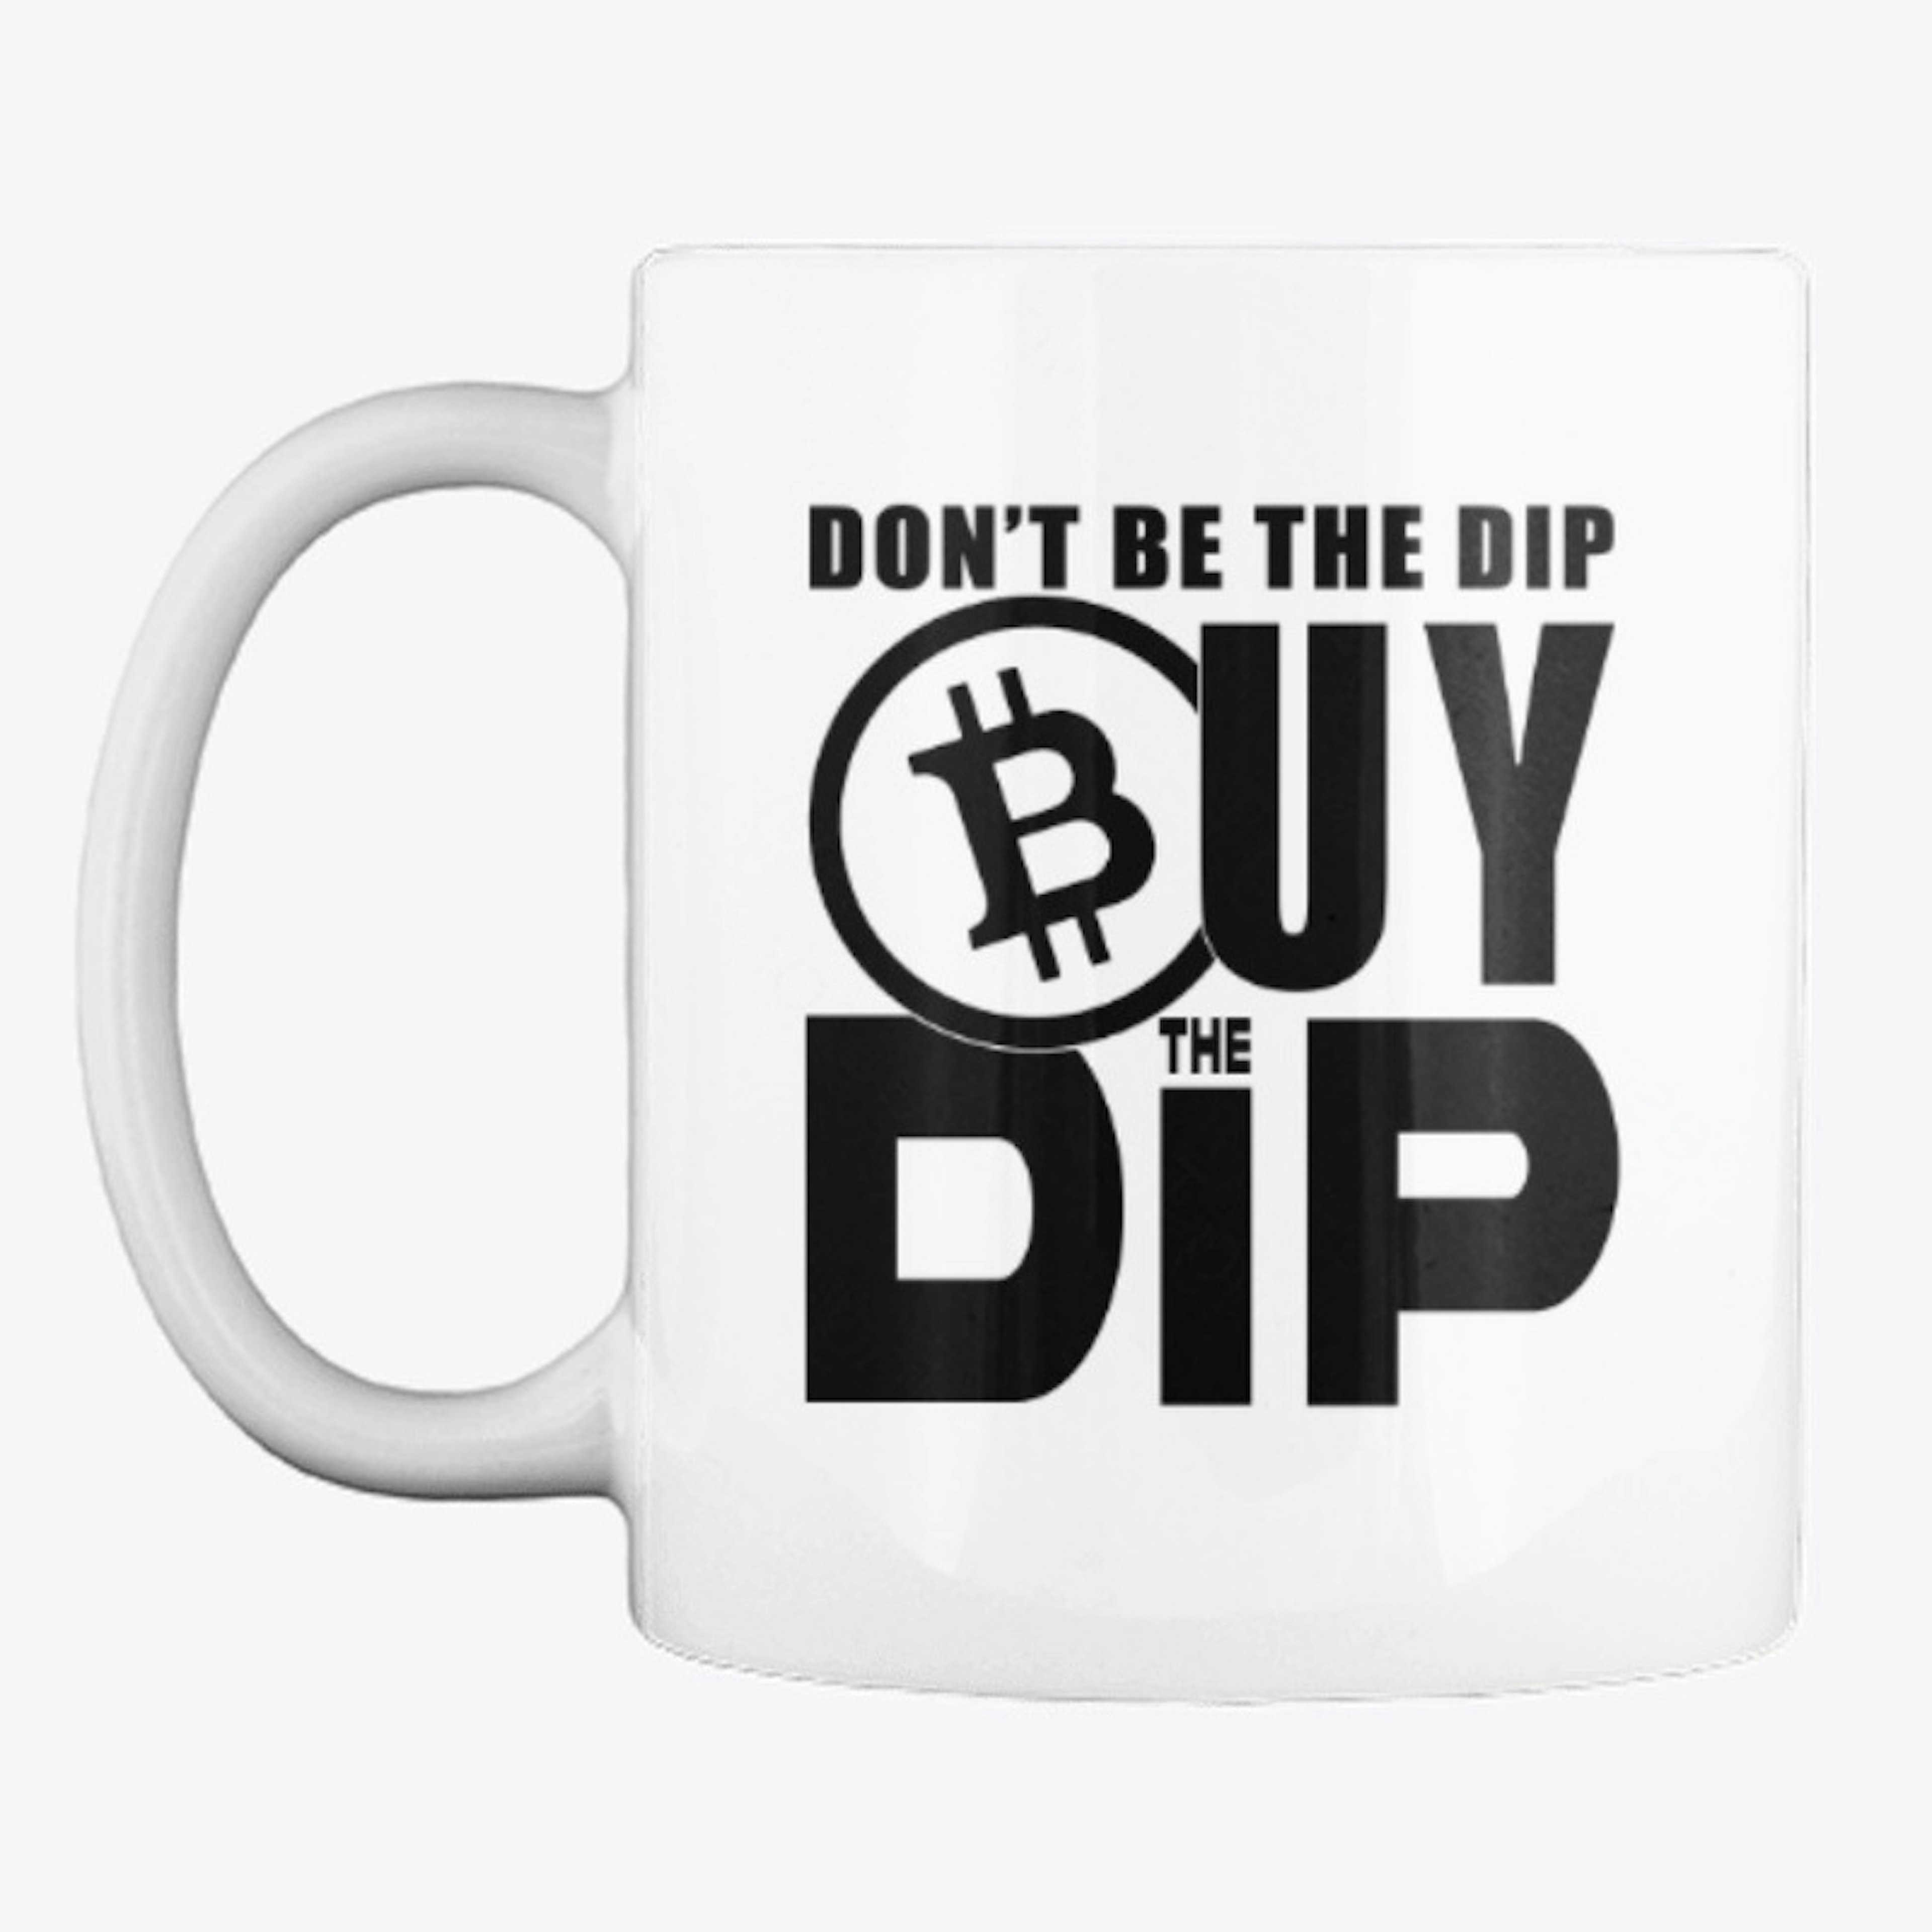 Don't Be the Dip